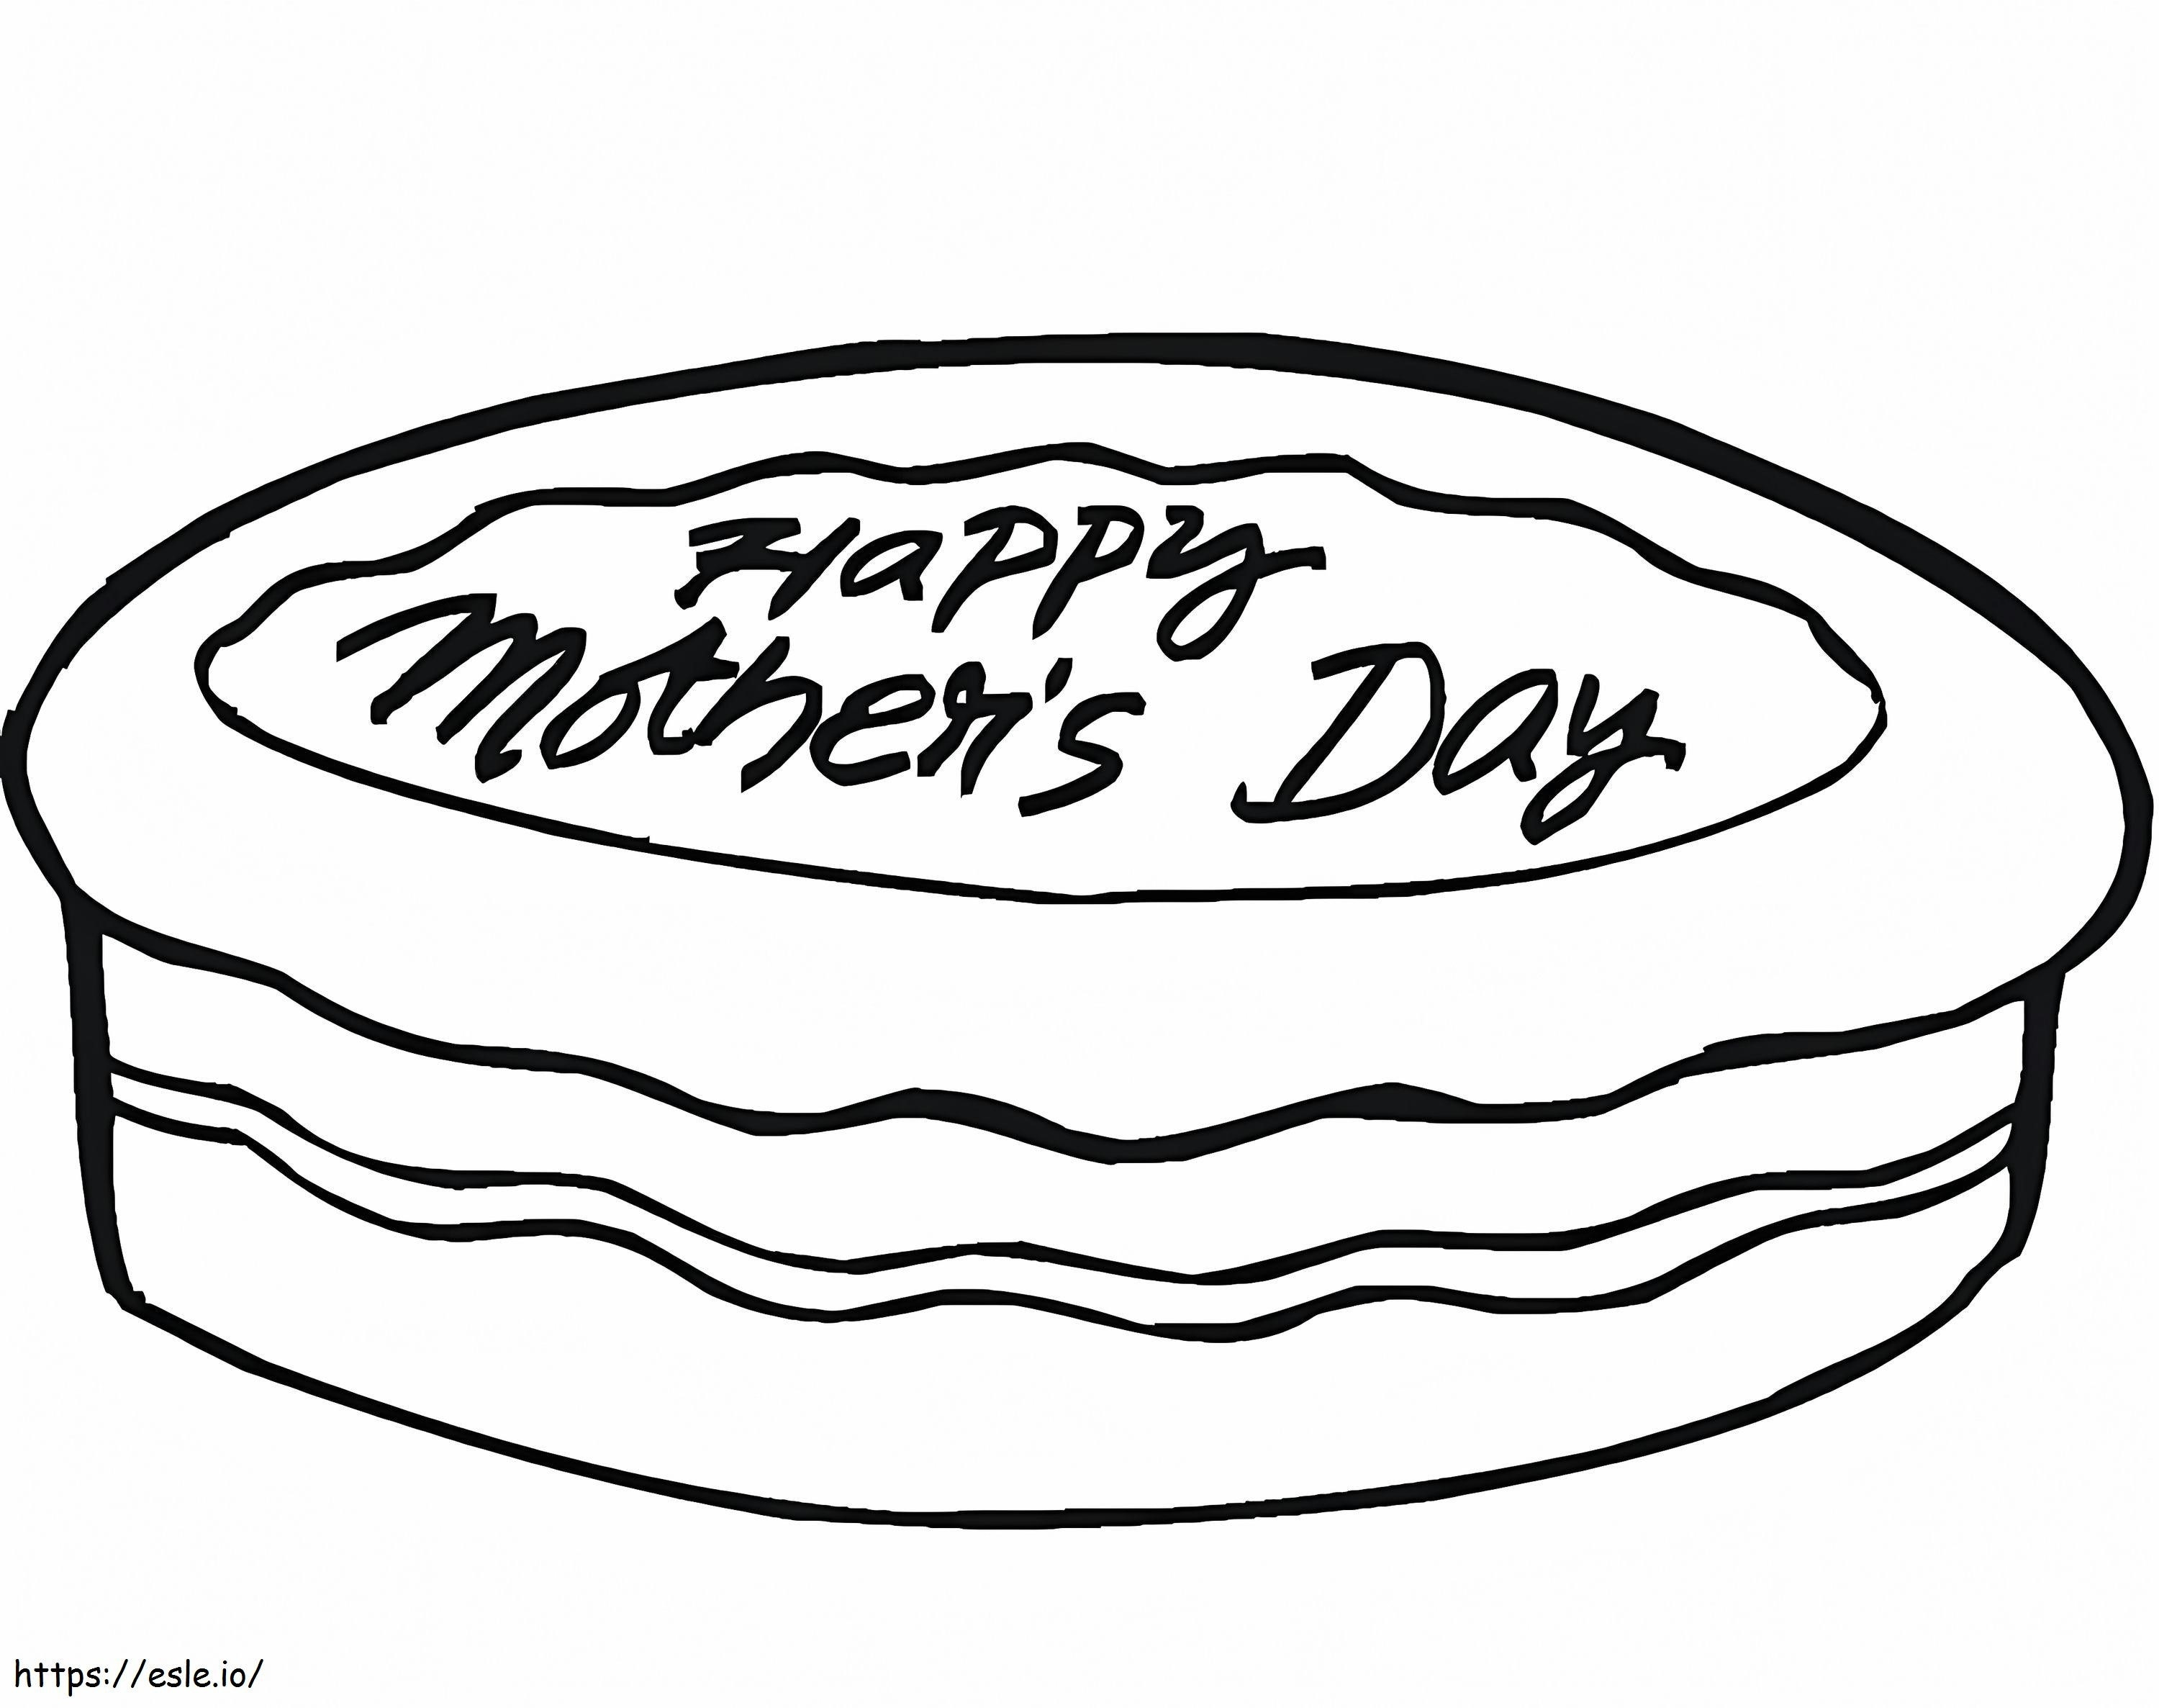 Happy Mothers Day Cake coloring page